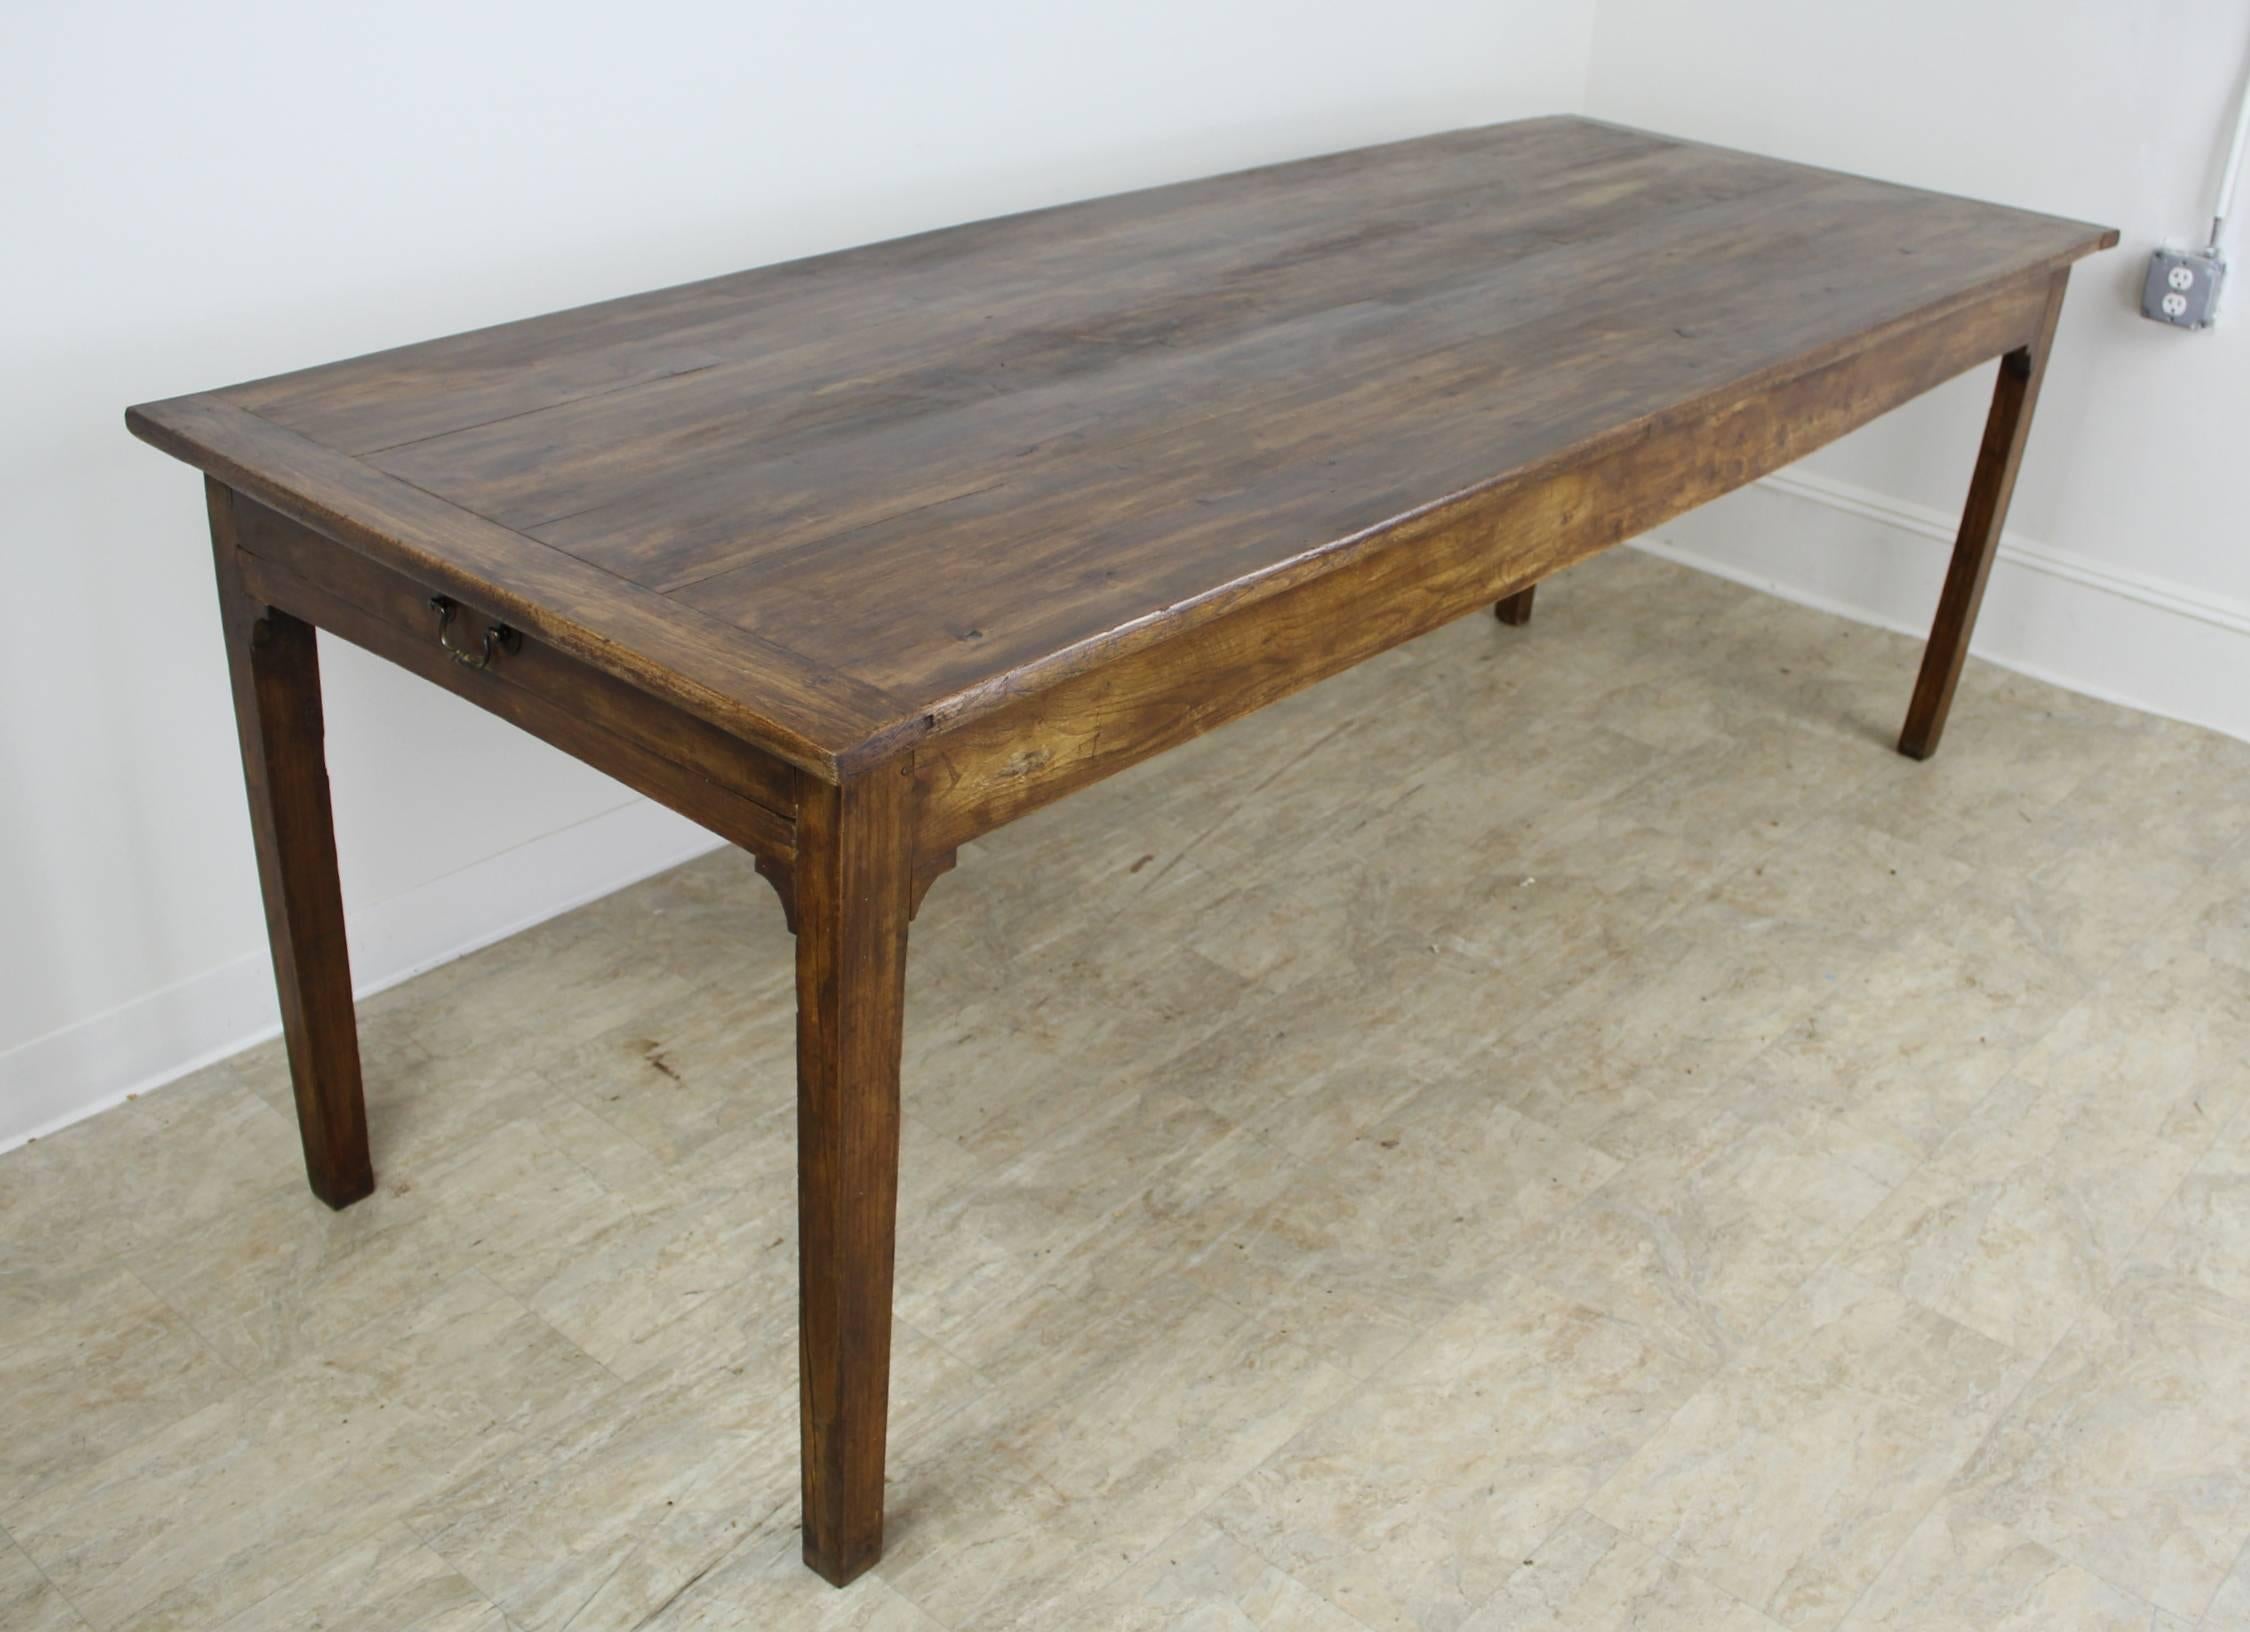 A wonderful elm farm table generously proportioned for maximum seating with 81 inches between the legs on the long side. A drawer at either end or bread boards on top add interest, as do the carved supports under each leg. The grain, color and